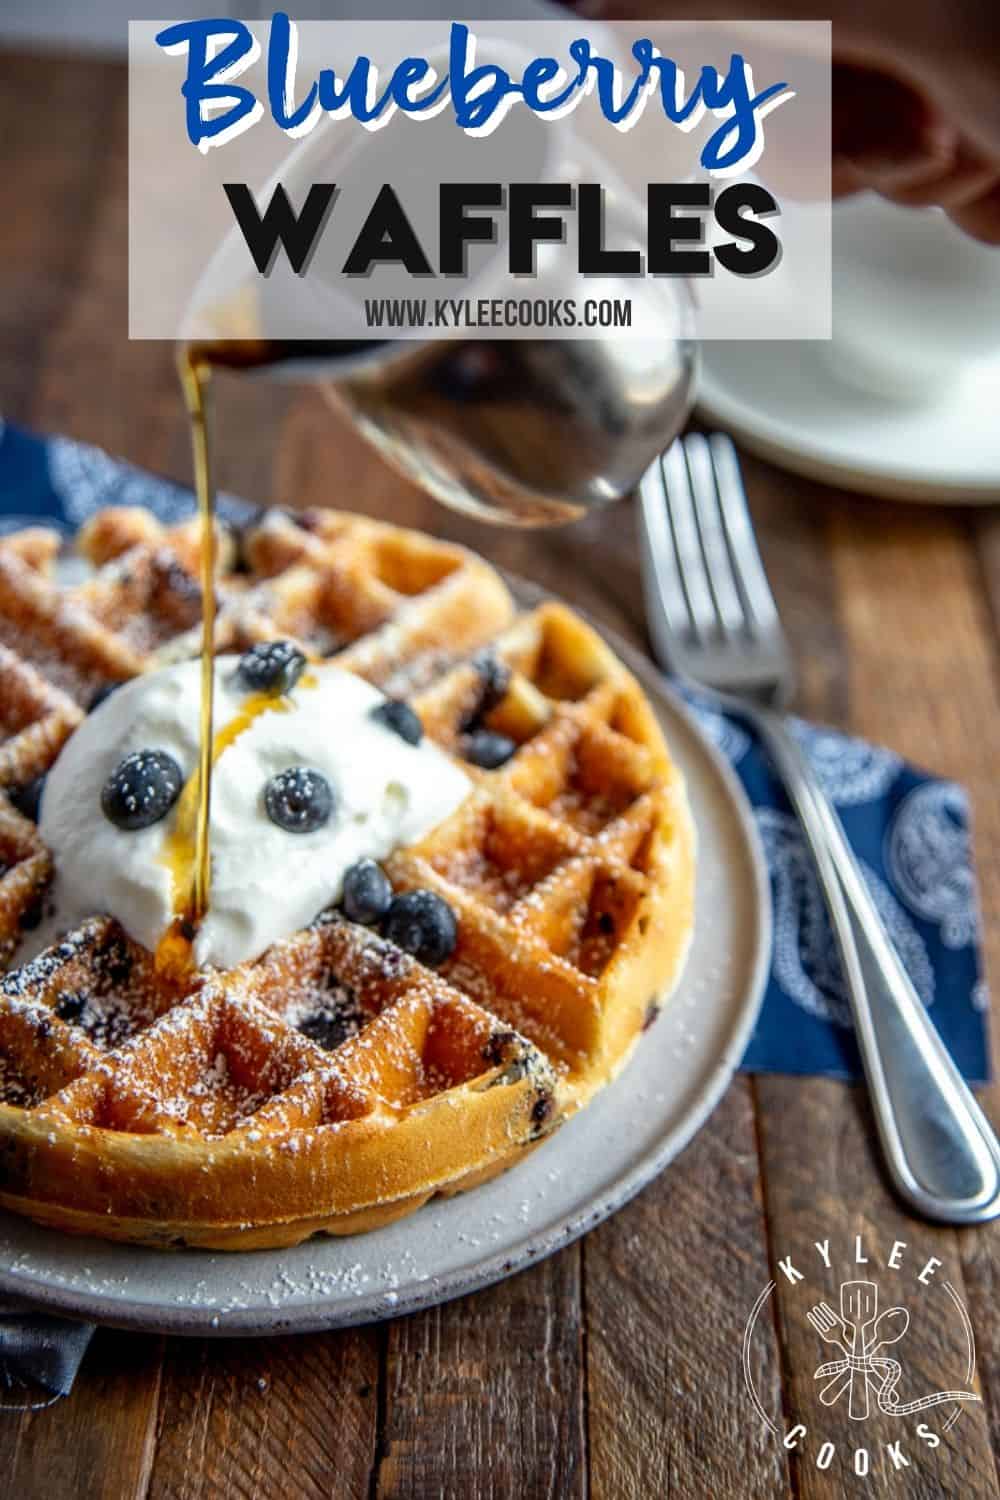 Blueberry waffles on a plate with recipe name overlaid in text.